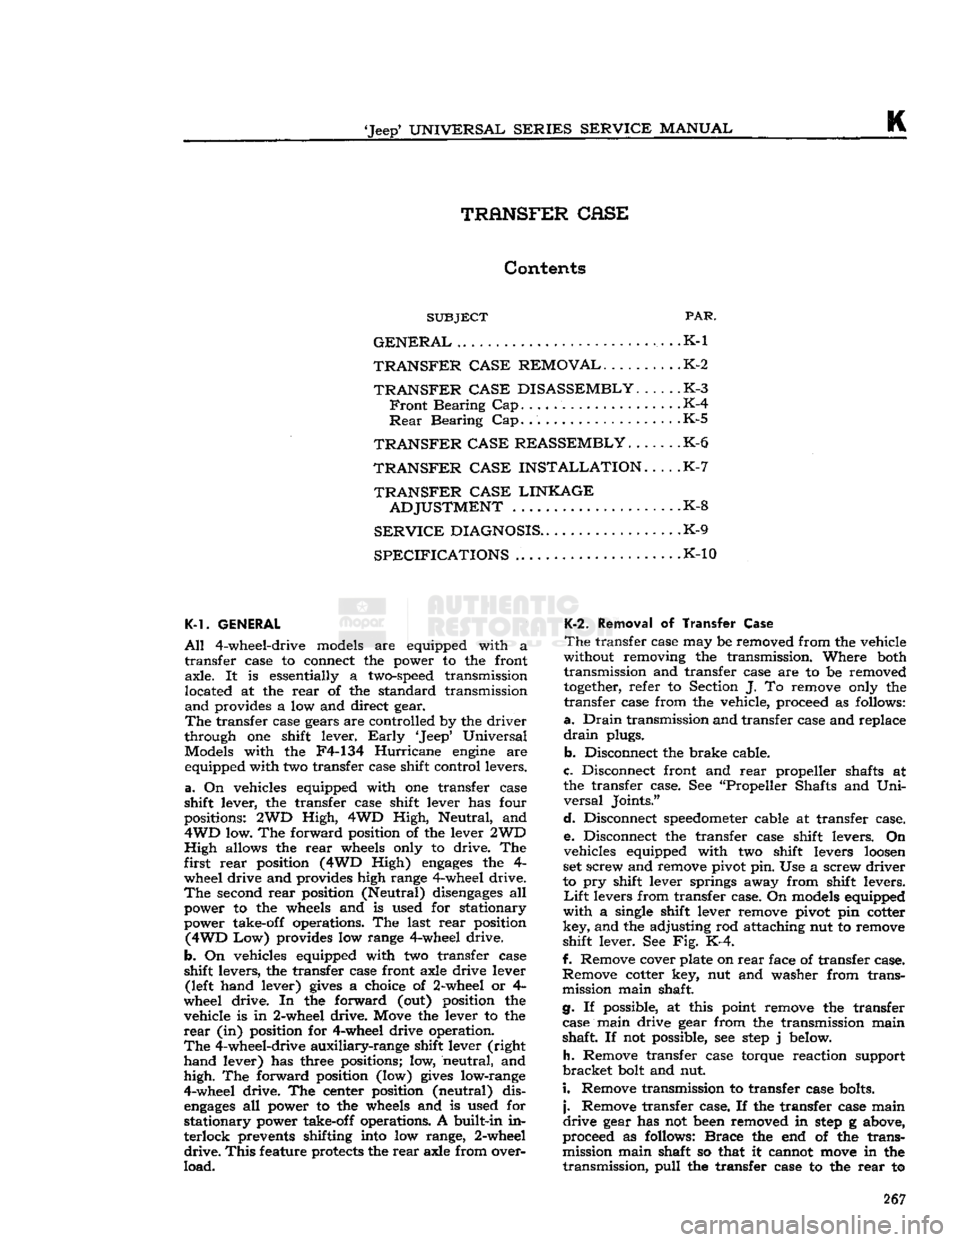 JEEP CJ 1953  Service Manual 
Jeep
 UNIVERSAL SERIES SERVICE
 MANUAL 

ft 
TRANSFER CASE 

Contents 

SUBJECT
 PAR. 

GENERAL
 . . .K-1 

TRANSFER CASE REMOVAL
 K-2 
 TRANSFER CASE DISASSEMBLY
 K-3 
 Front
 Bearing Cap K-4 

Re